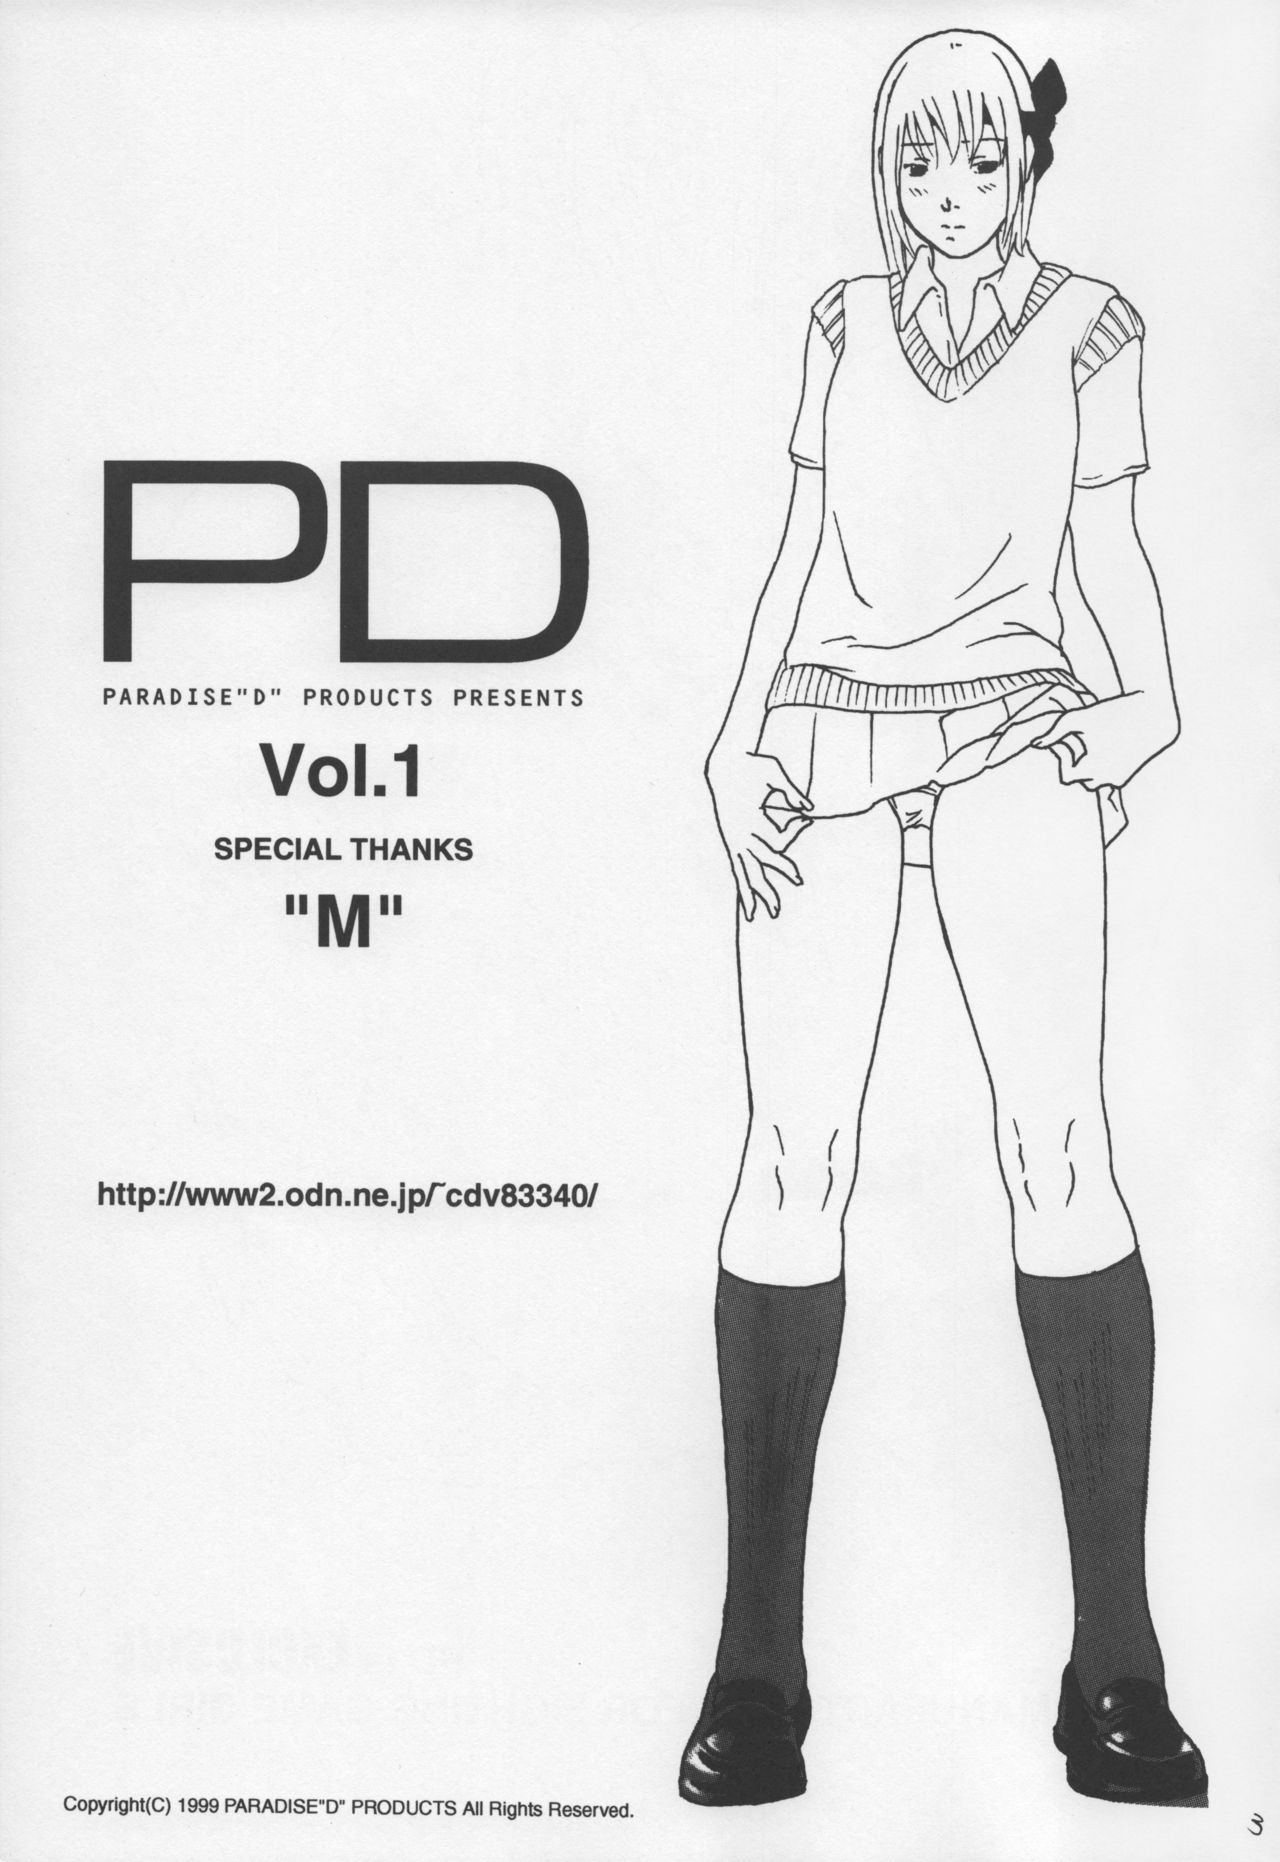 (C62) [PARADISED PRODUCTS (HJB)] PD Vol. 1 (Dead or Alive) page 2 full